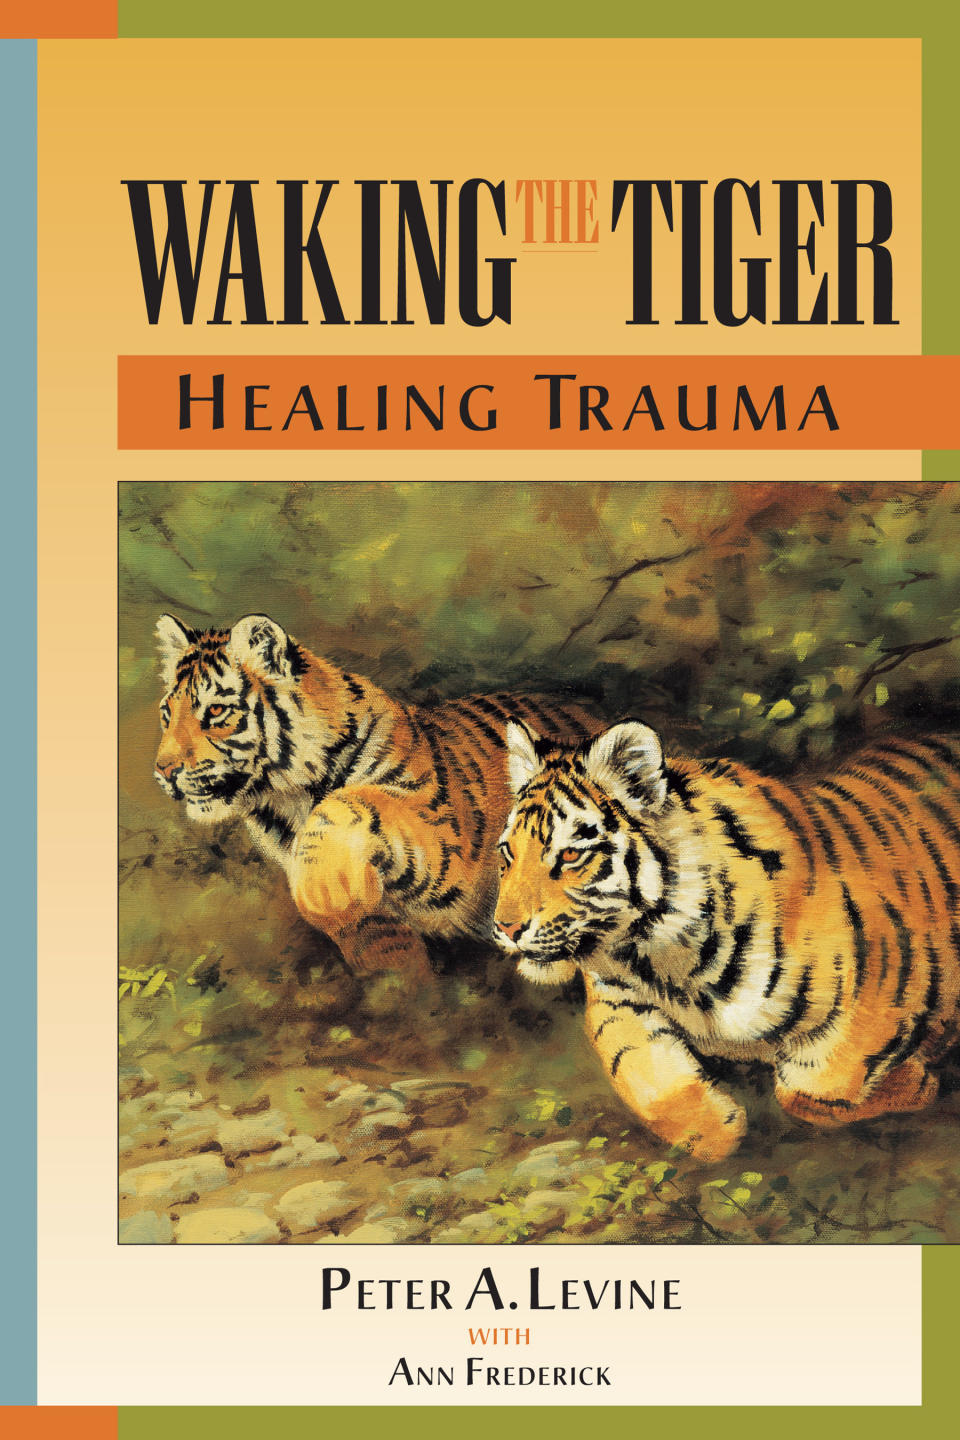 Waking the Tiger is a good resource to get acquainted with the somatic approach. It has a somewhat messy structure, but it tells the essence of the matter. Peter A. Levine says trauma only occurs in pets and humans. He tries to solve these traumas by likening them to the trauma response system that wild animals experience. Levine employs a series of exercises that focus on bodily sensations to lessen the trauma response.